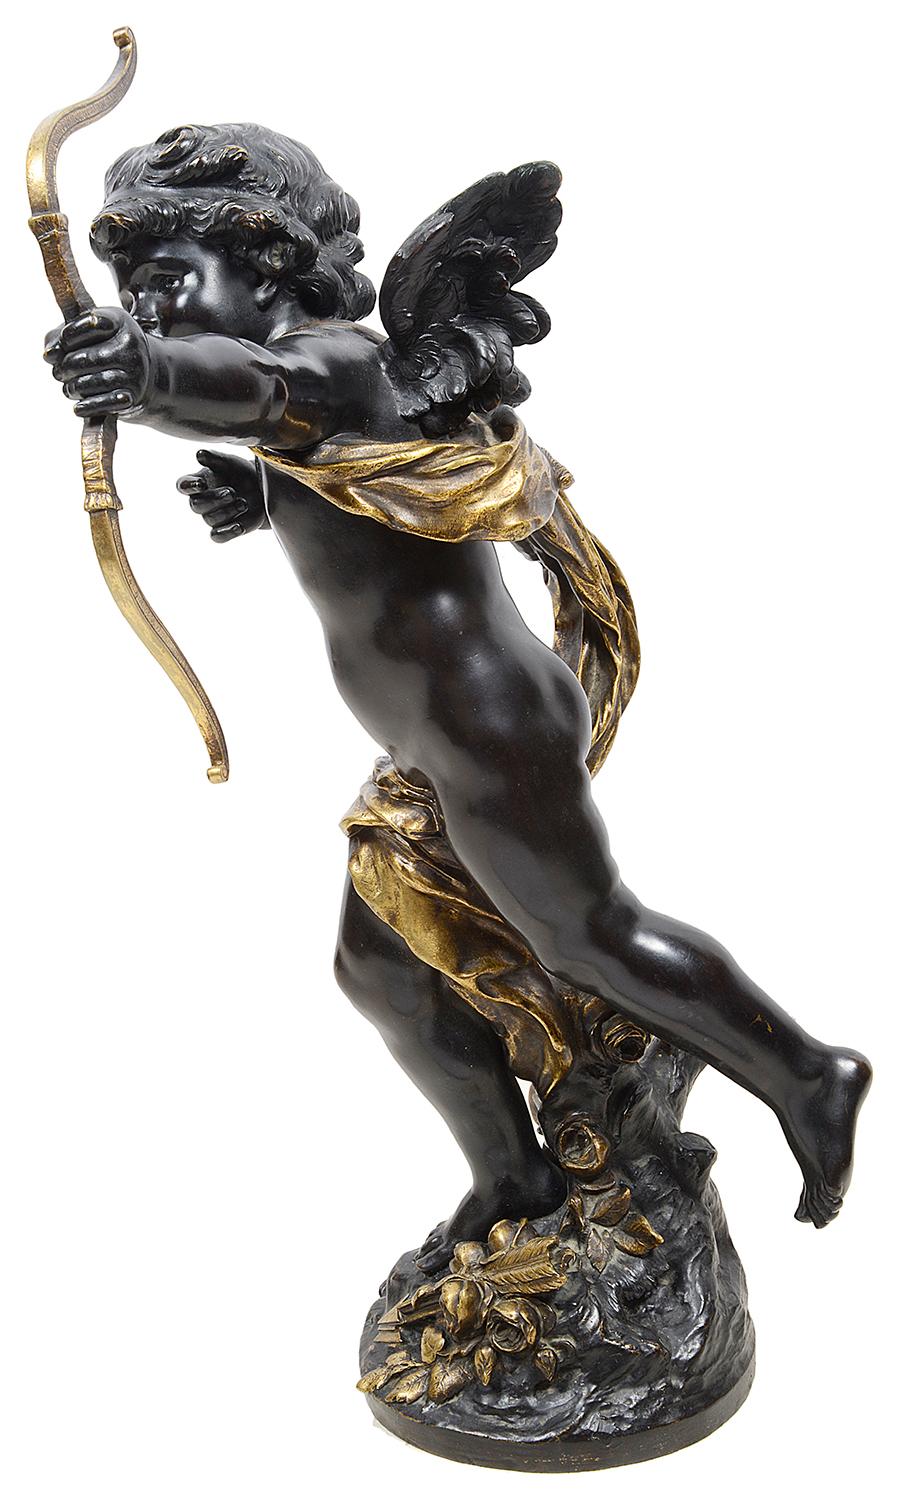 A very good quality 19th century bronze study of a cupid with gilded highlights, signed Aug. Moreau.

Auguste Louis Marthurin Moreau was born in Dijon in 1834 and died in Malesherbes in 1917 being the youngest son of sculptor and painter